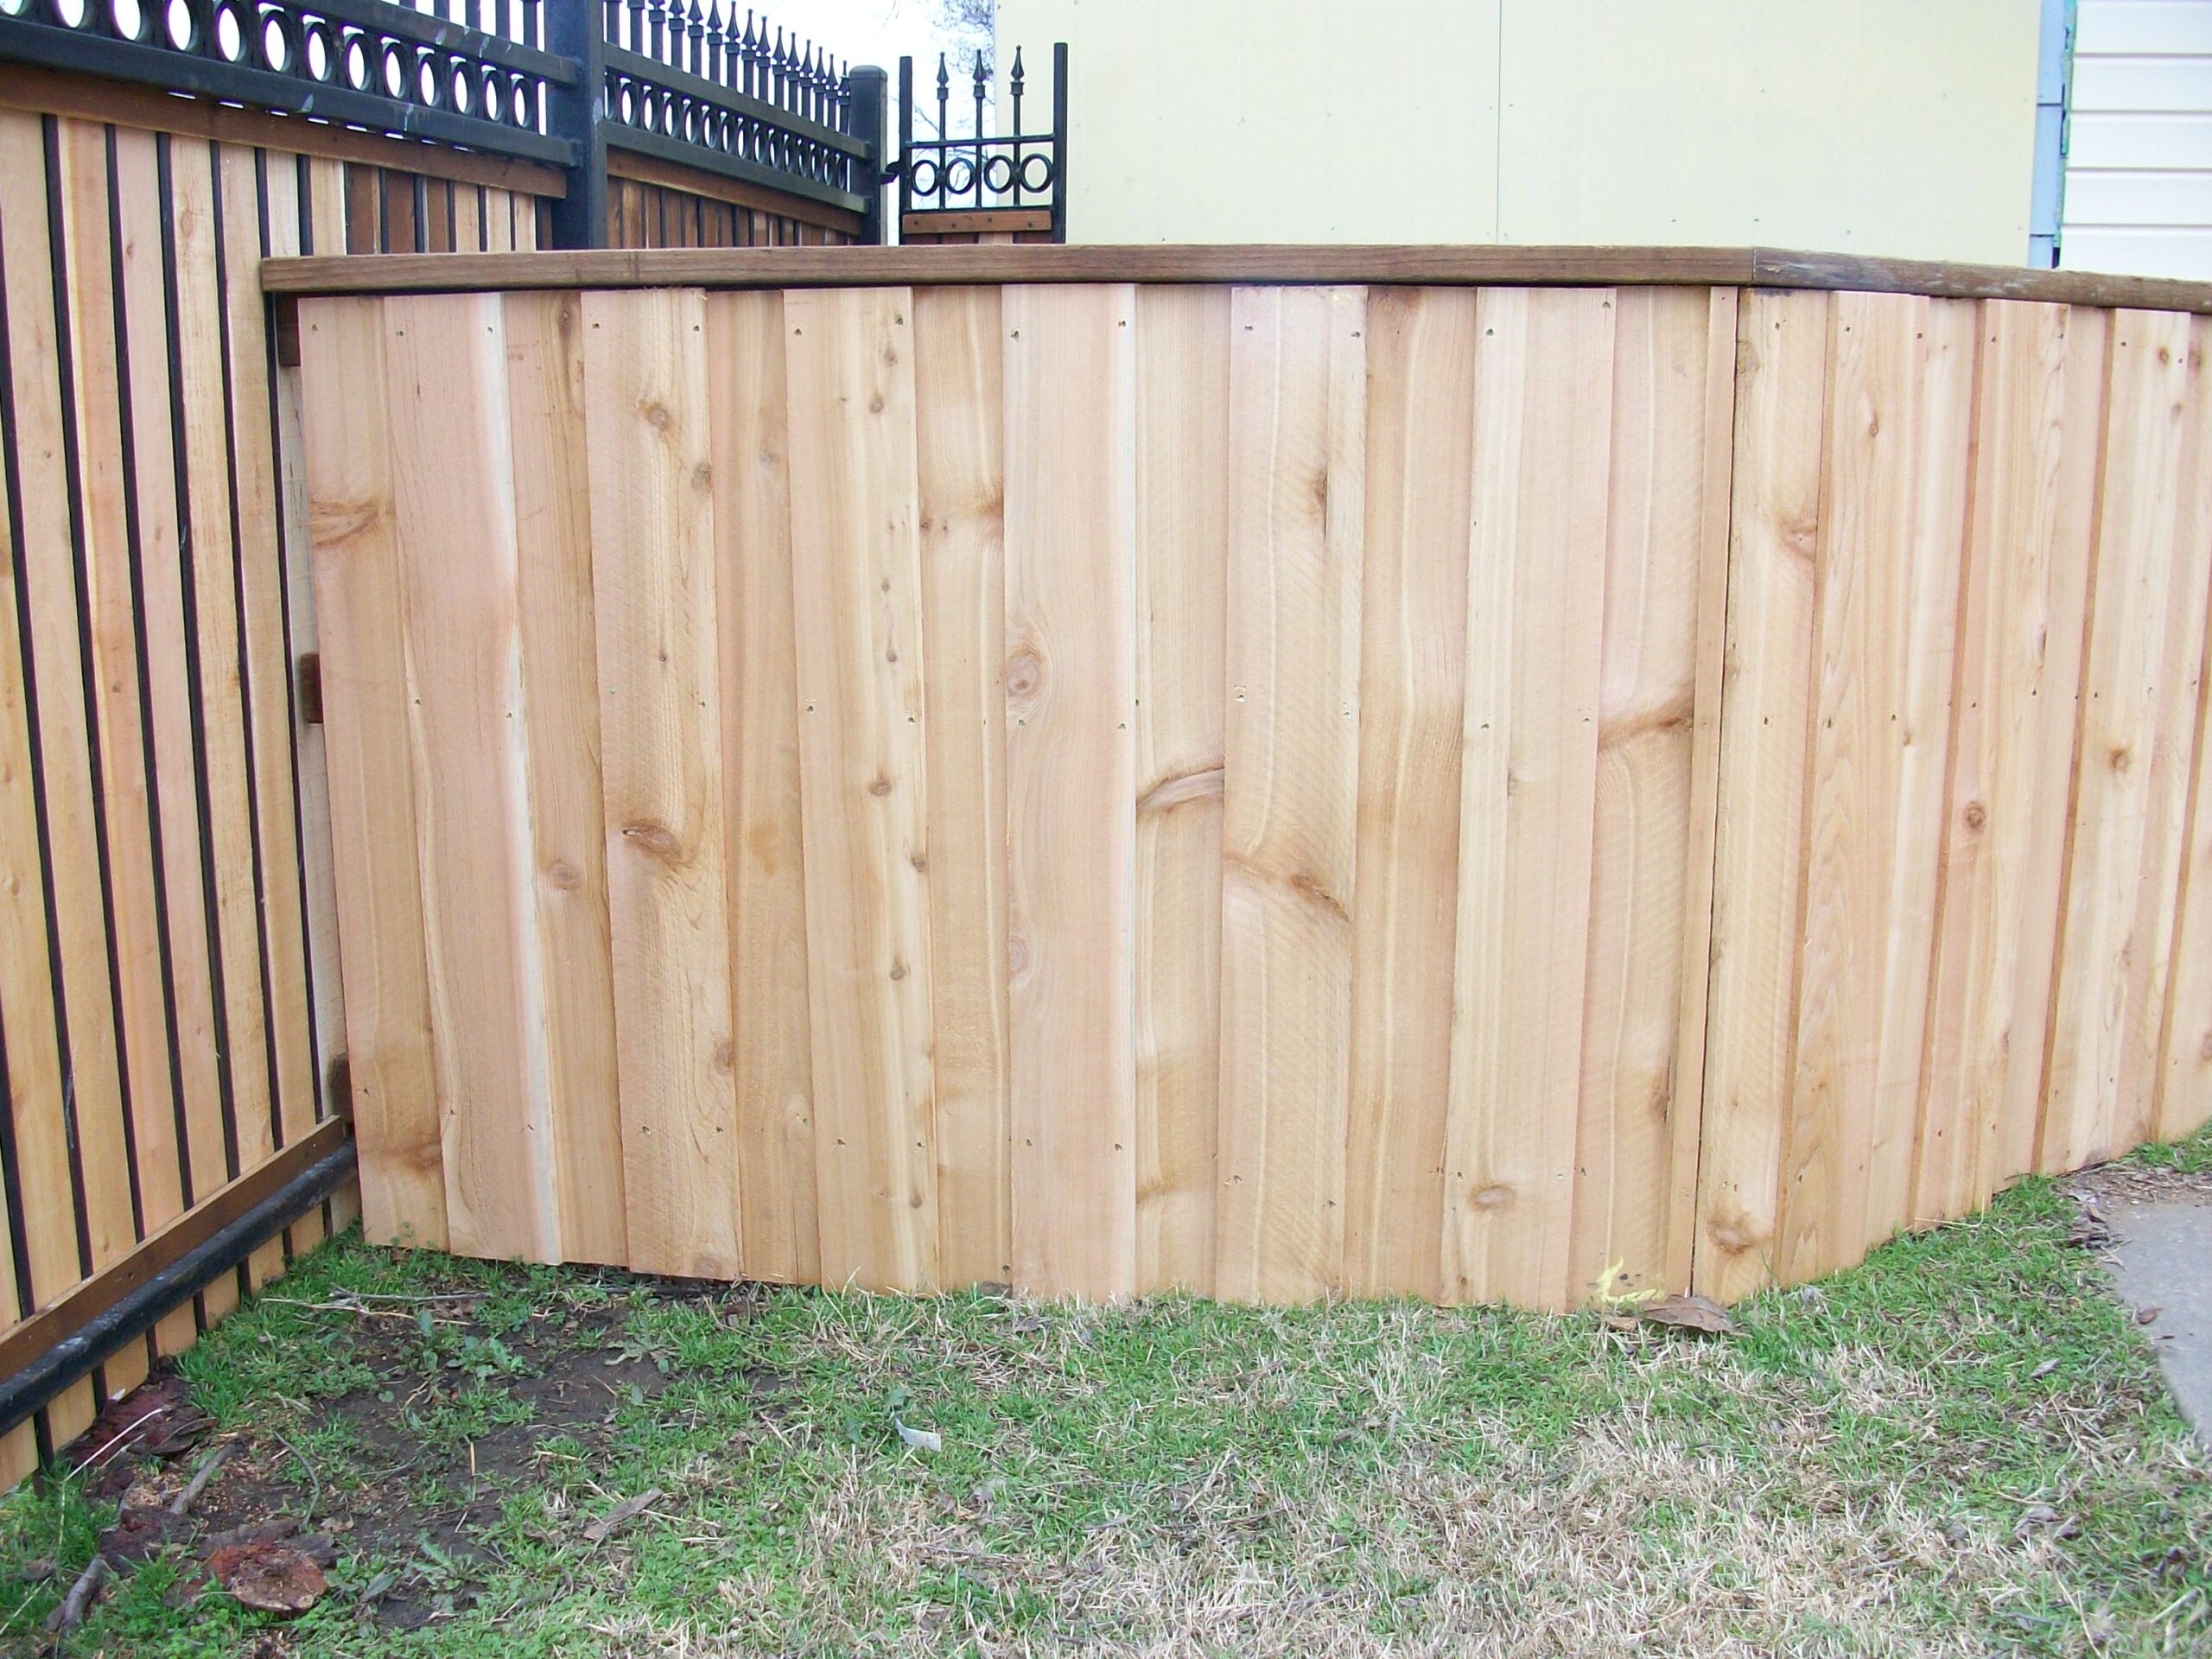 Wood Fence builder and installation